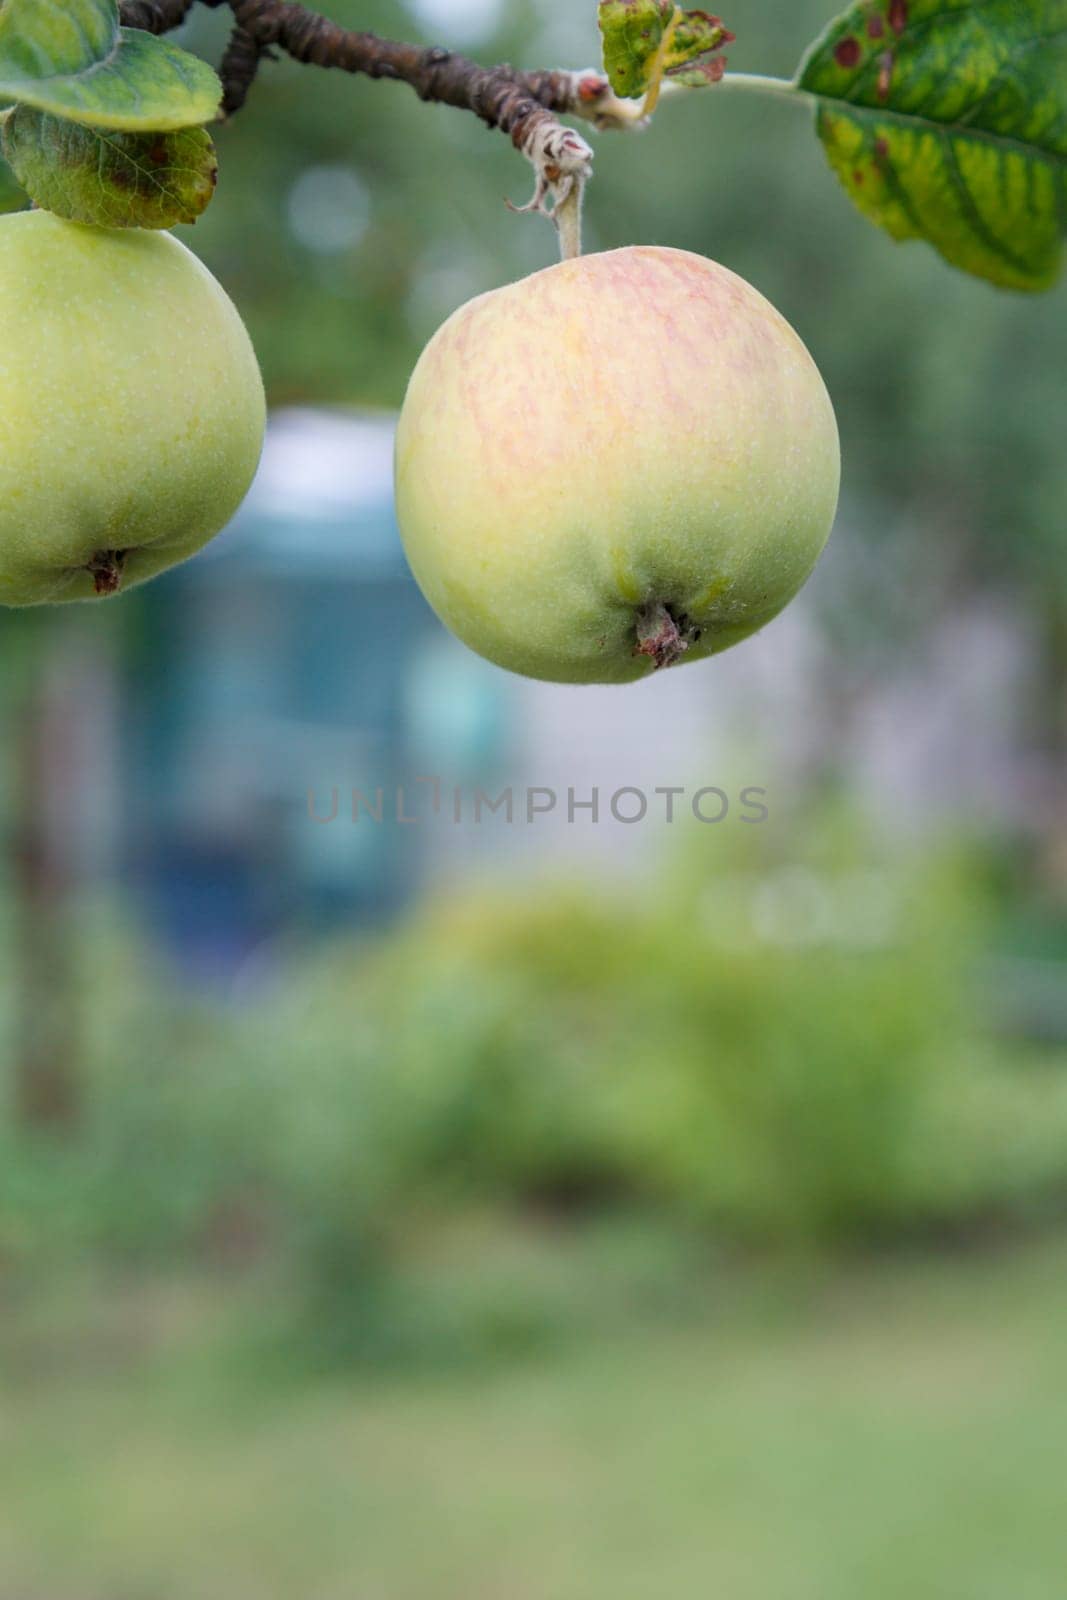 Close-up view of green unripe apples on the tree in the garden in summer day with natural blurred background. Shallow depth of field.